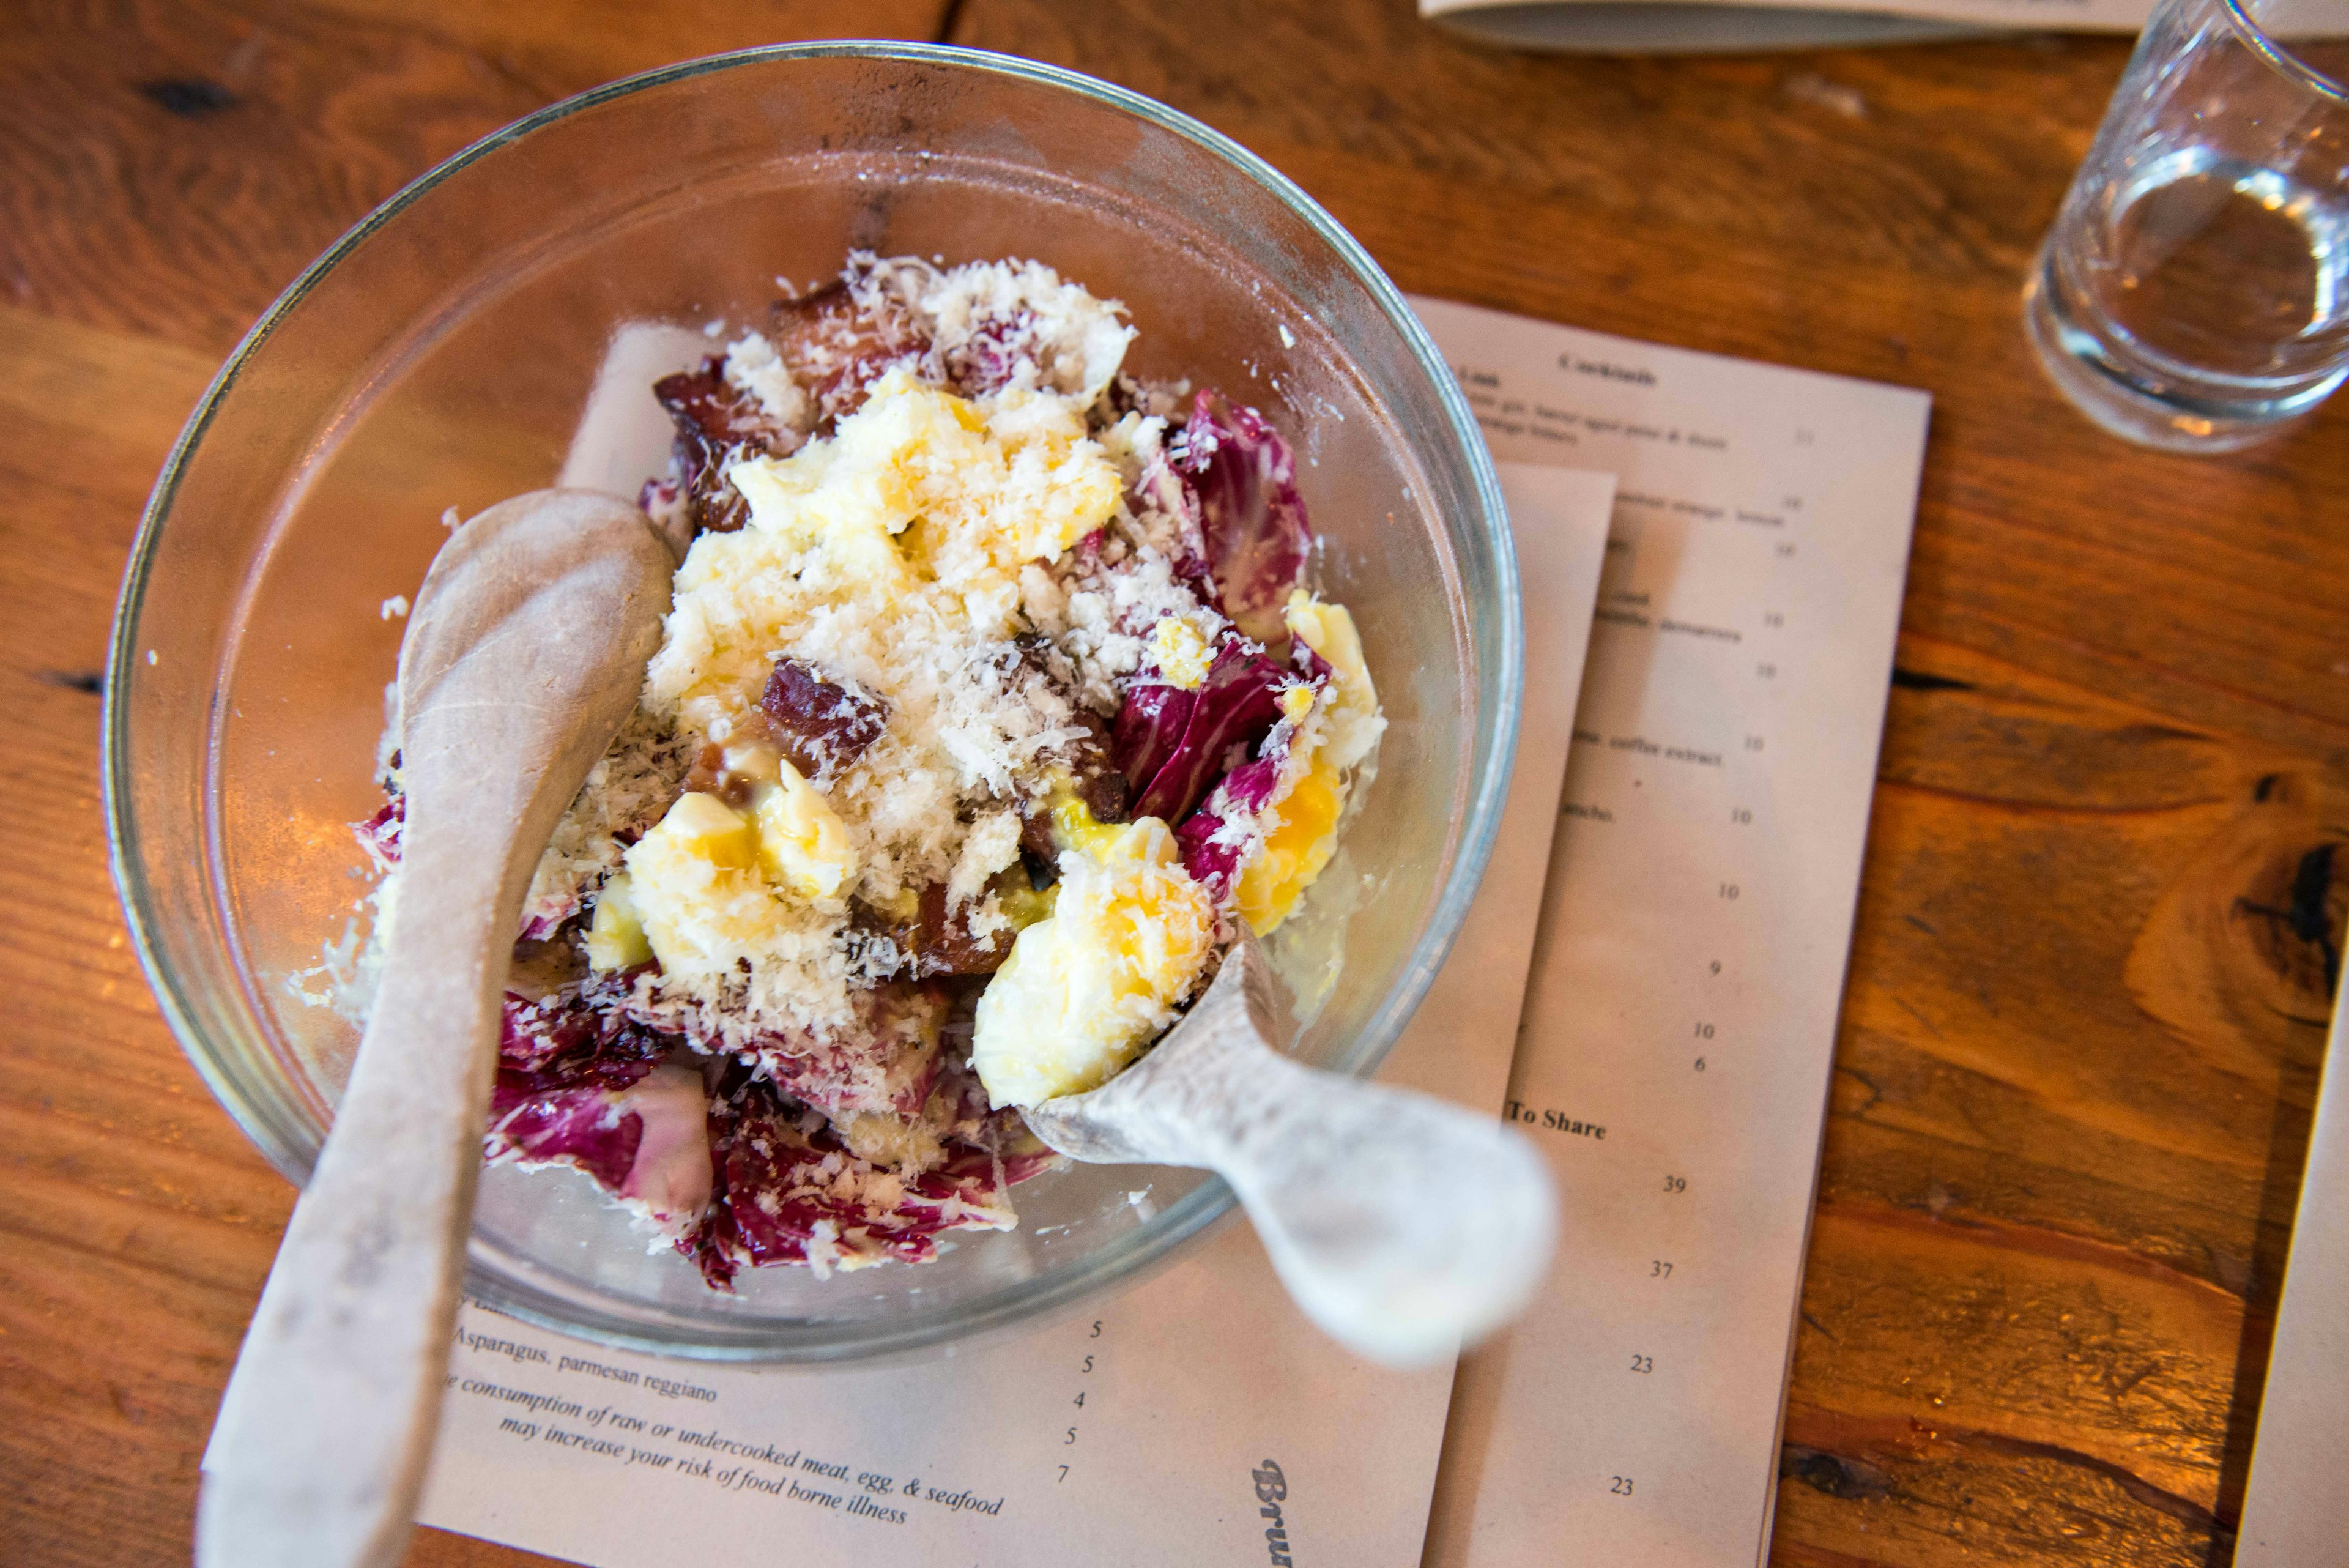 Family-style brunch at Tasty n Alder in Downtown Portland. Image by Flash Parker / Lonely Planet